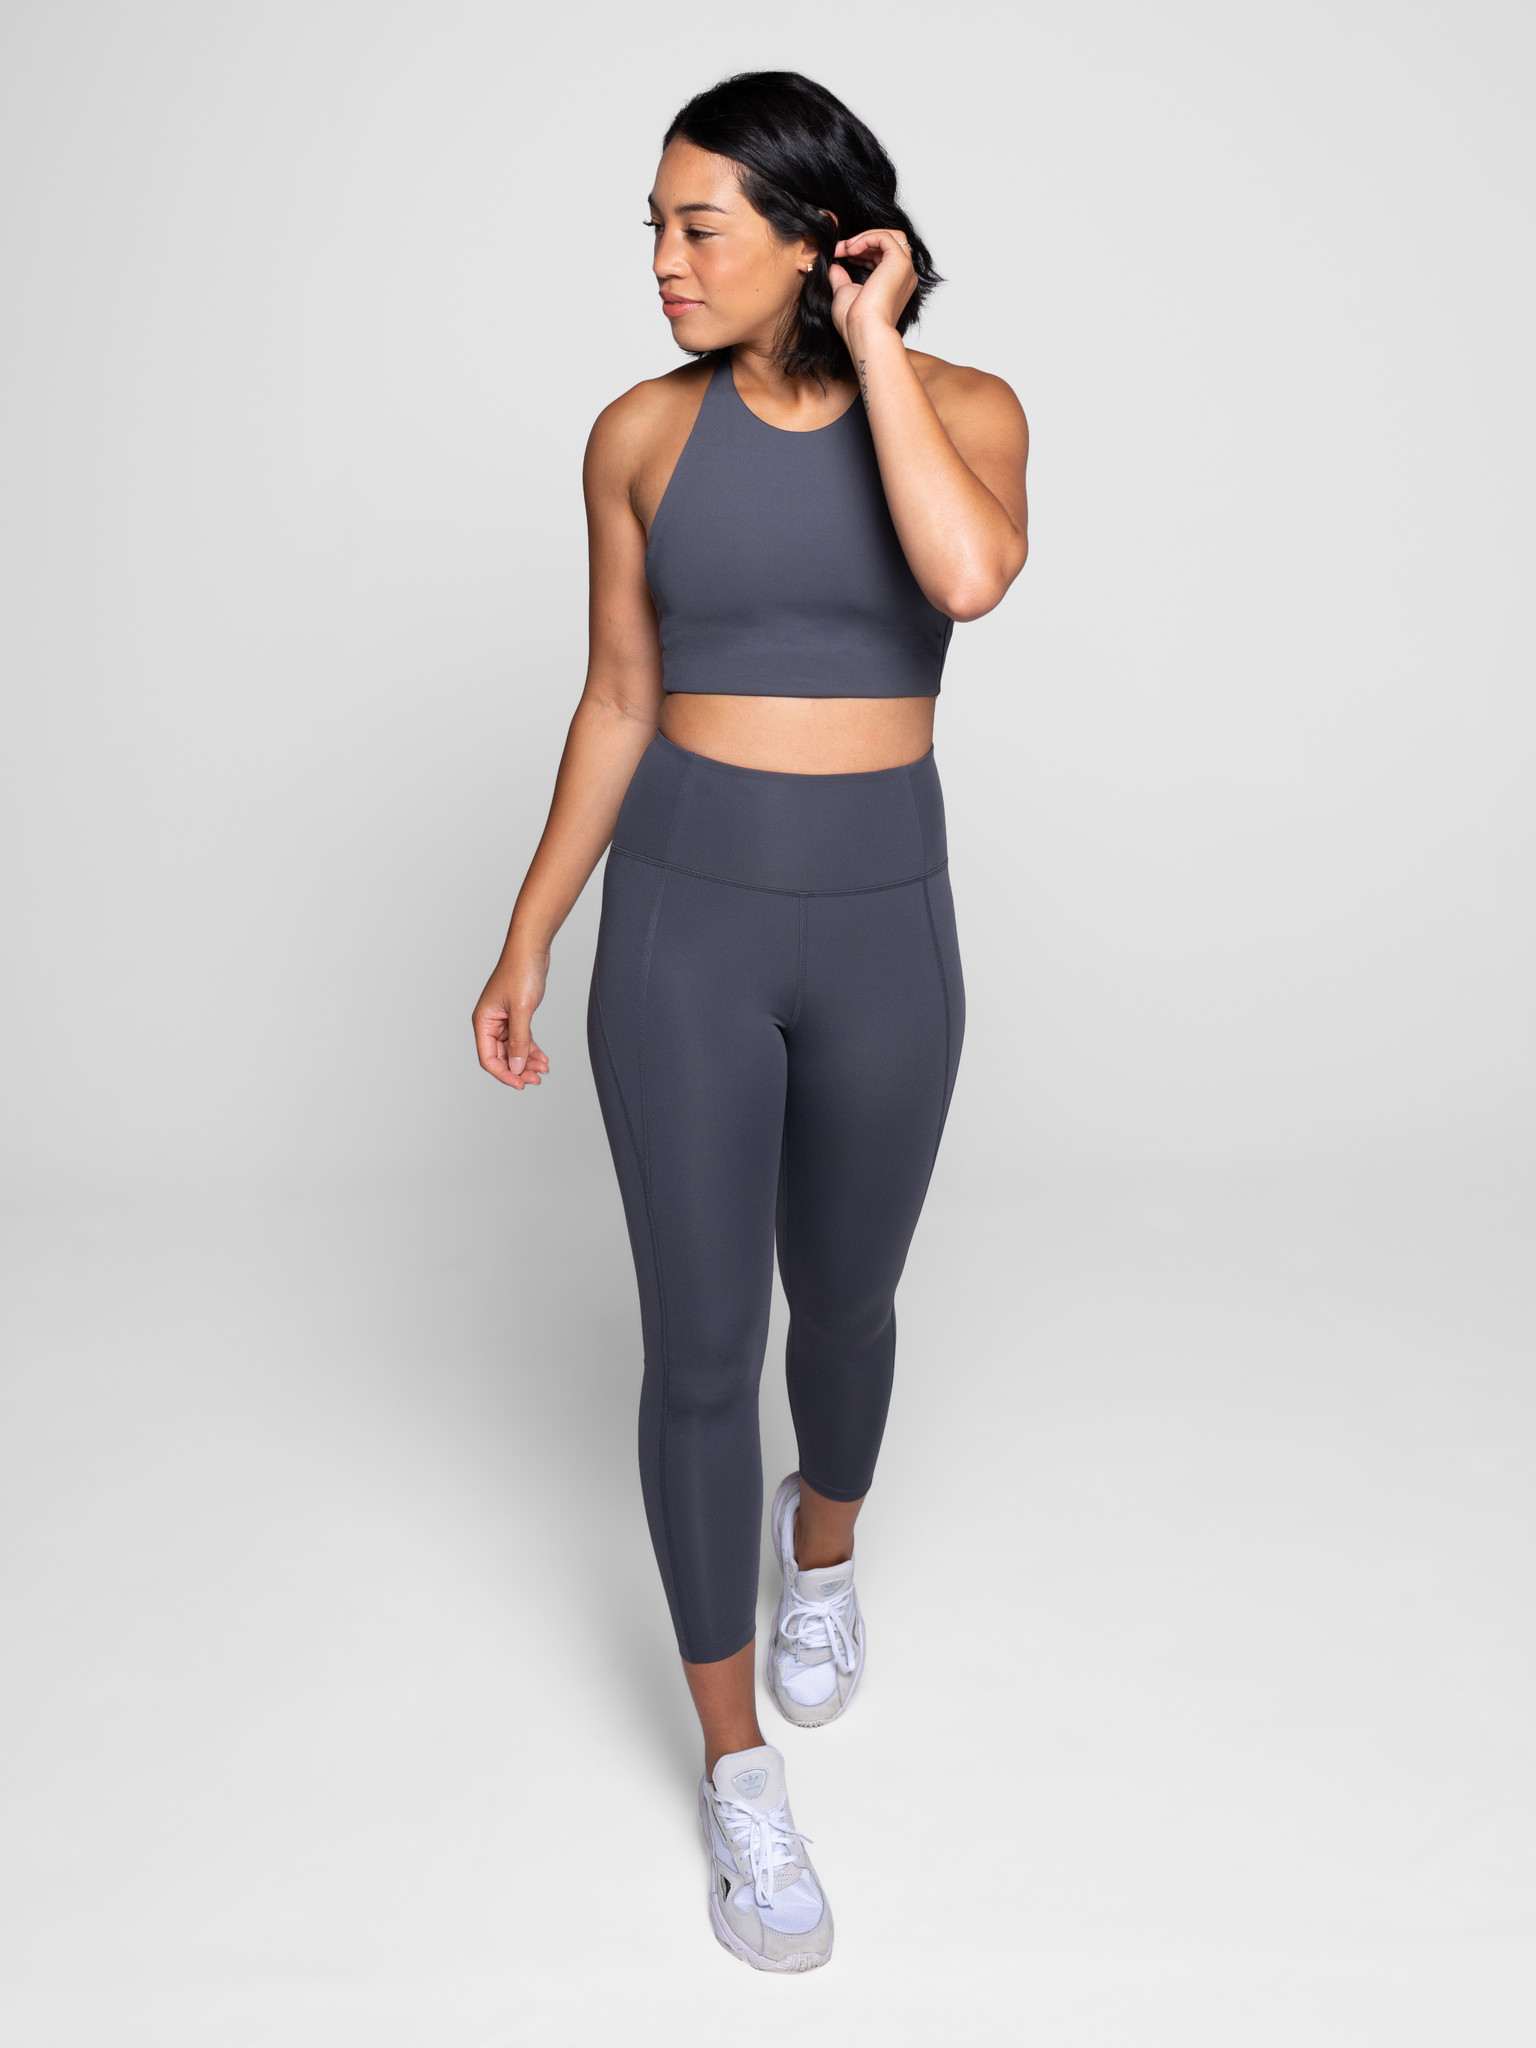 Girlfriend Collective Smoke grey Compressive High-Rise Legging Size XL -  $30 (61% Off Retail) - From Kao